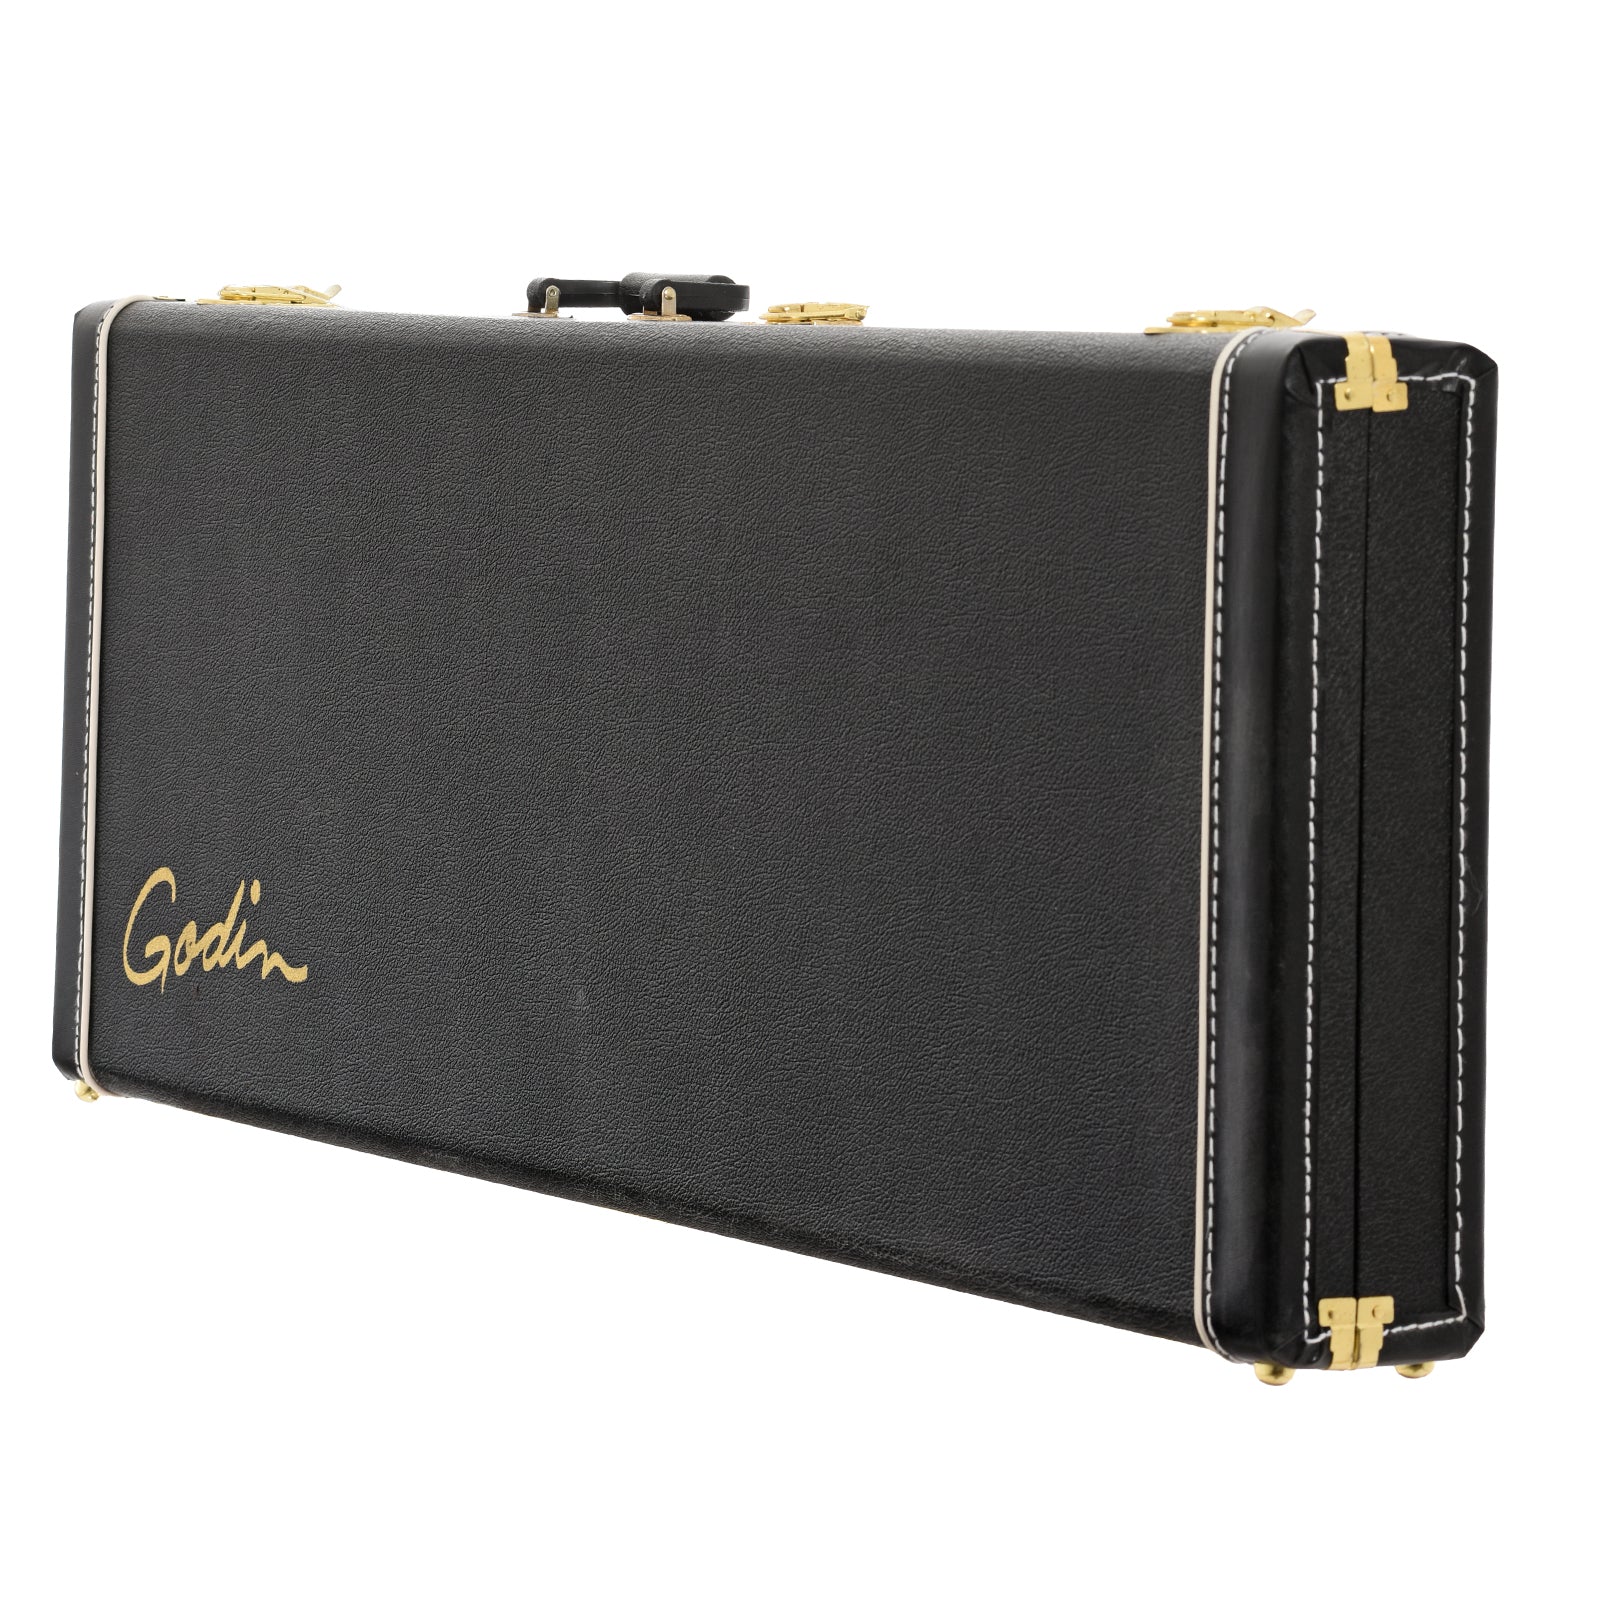 Case for Godin A12 12-String Acoustic-Electric 